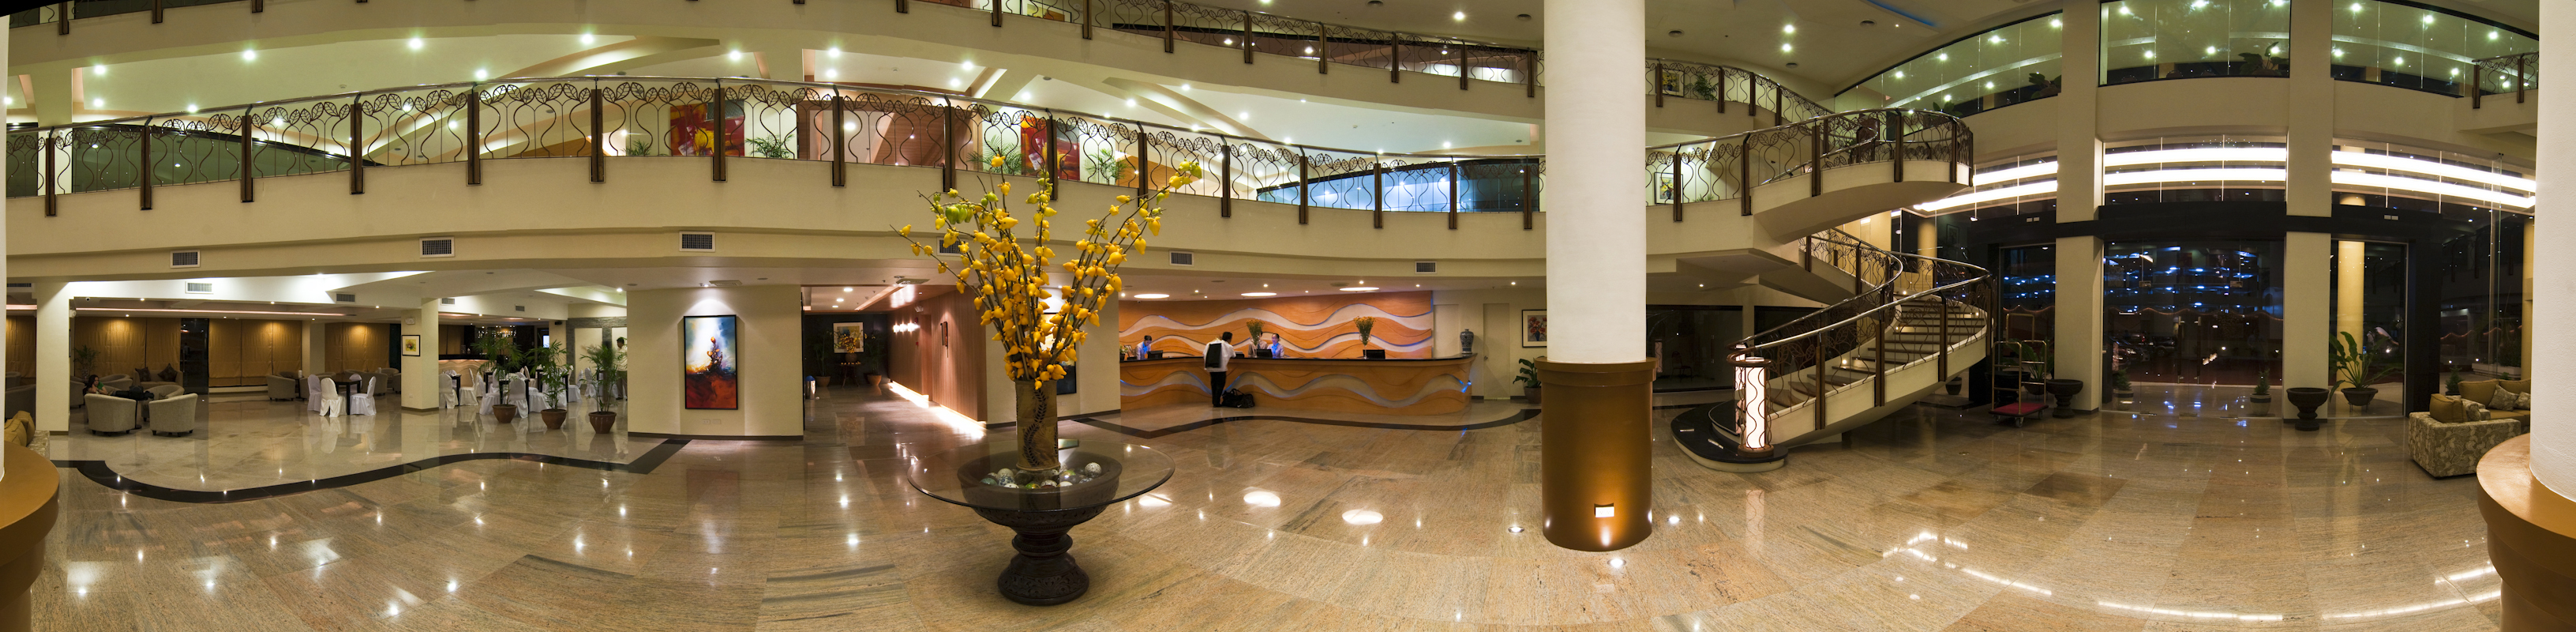 The Pinnacle Hotel and Suites - Lobby 9